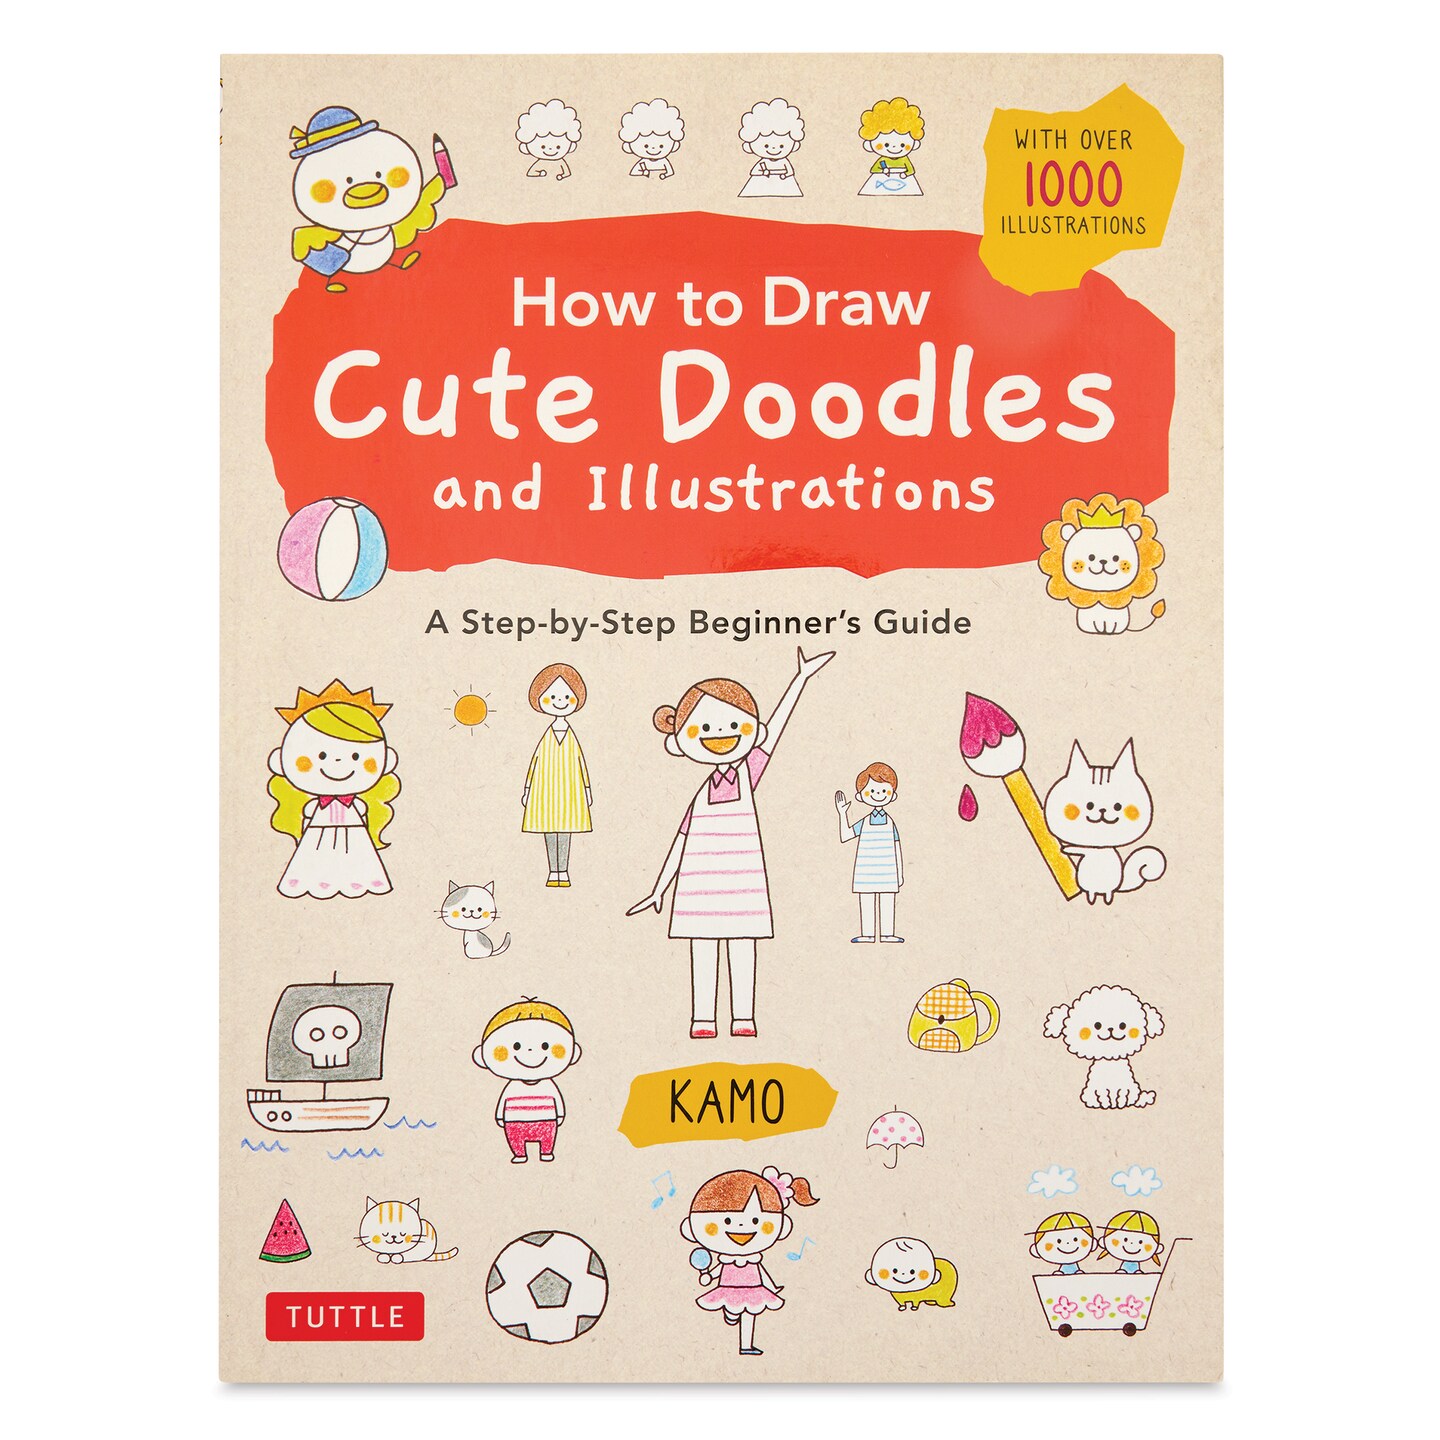 How To Draw Cute Doodle and Illustrations